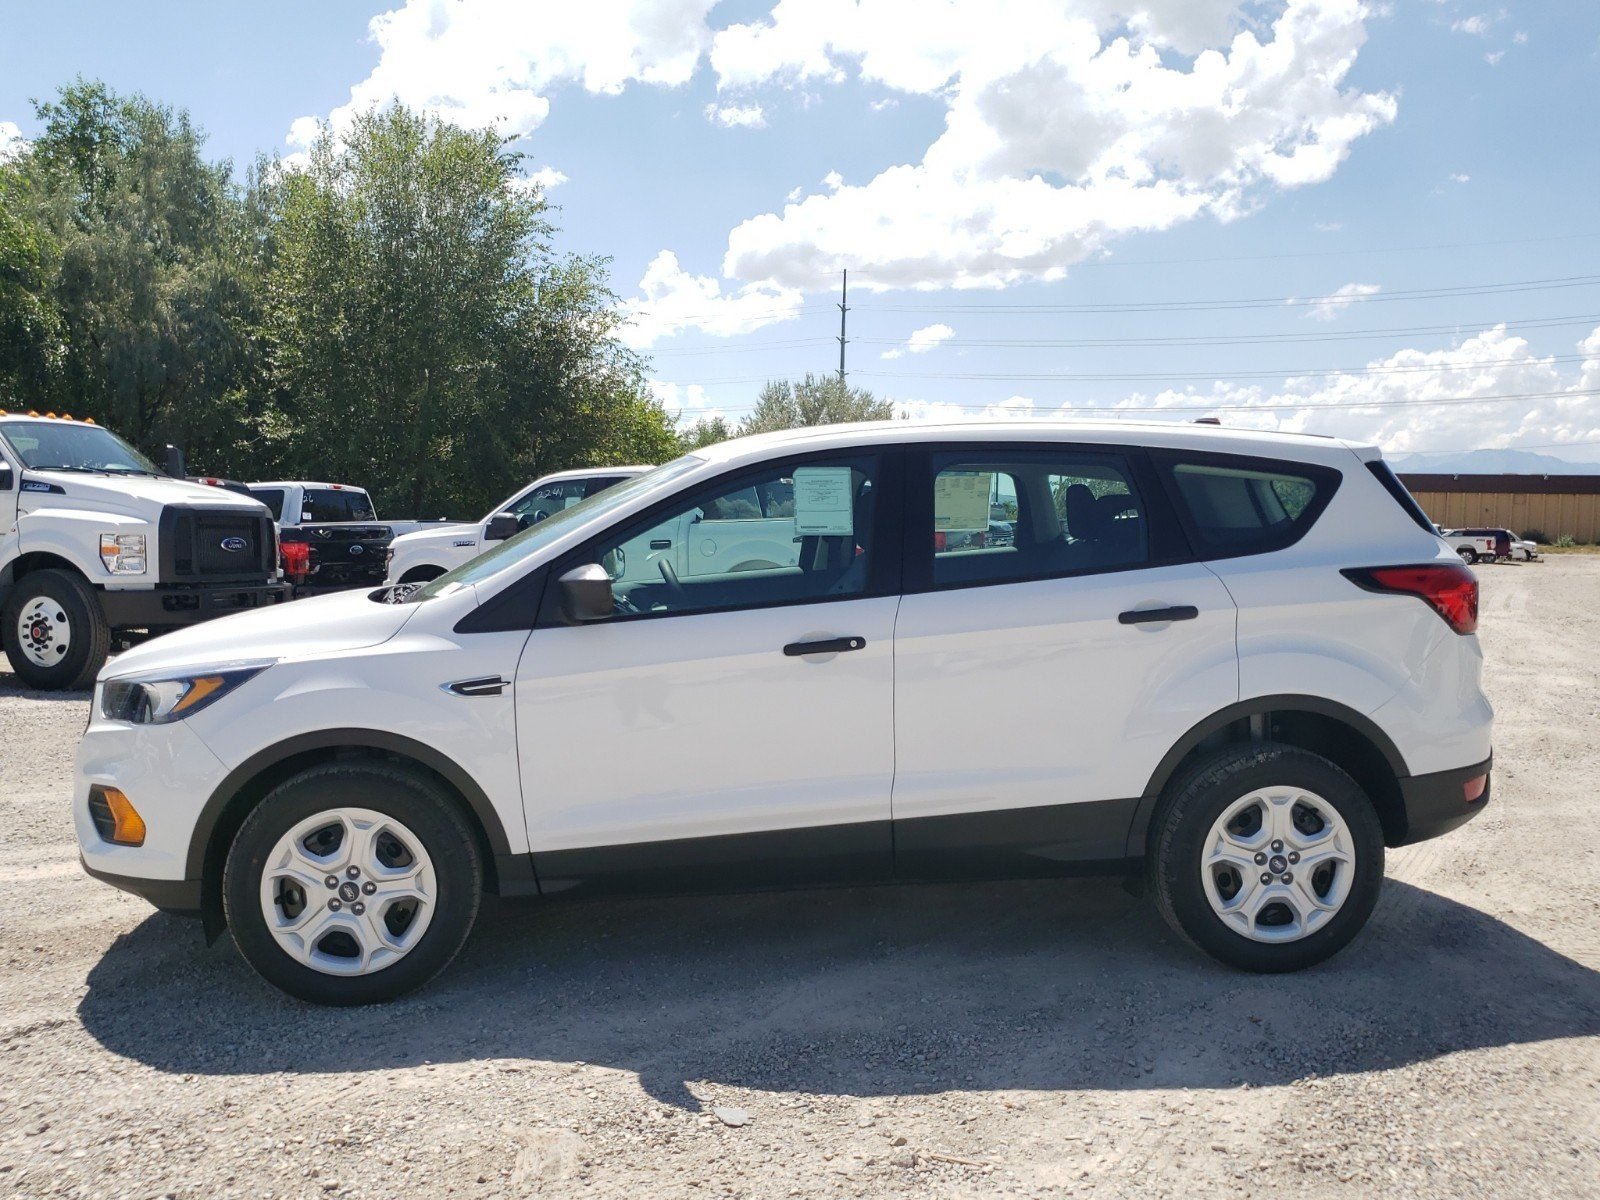 15 Top Photos Ford Escape Sport Utility Vehicle / https://topstores.net/want-suv-check-out-these-su-deals ...